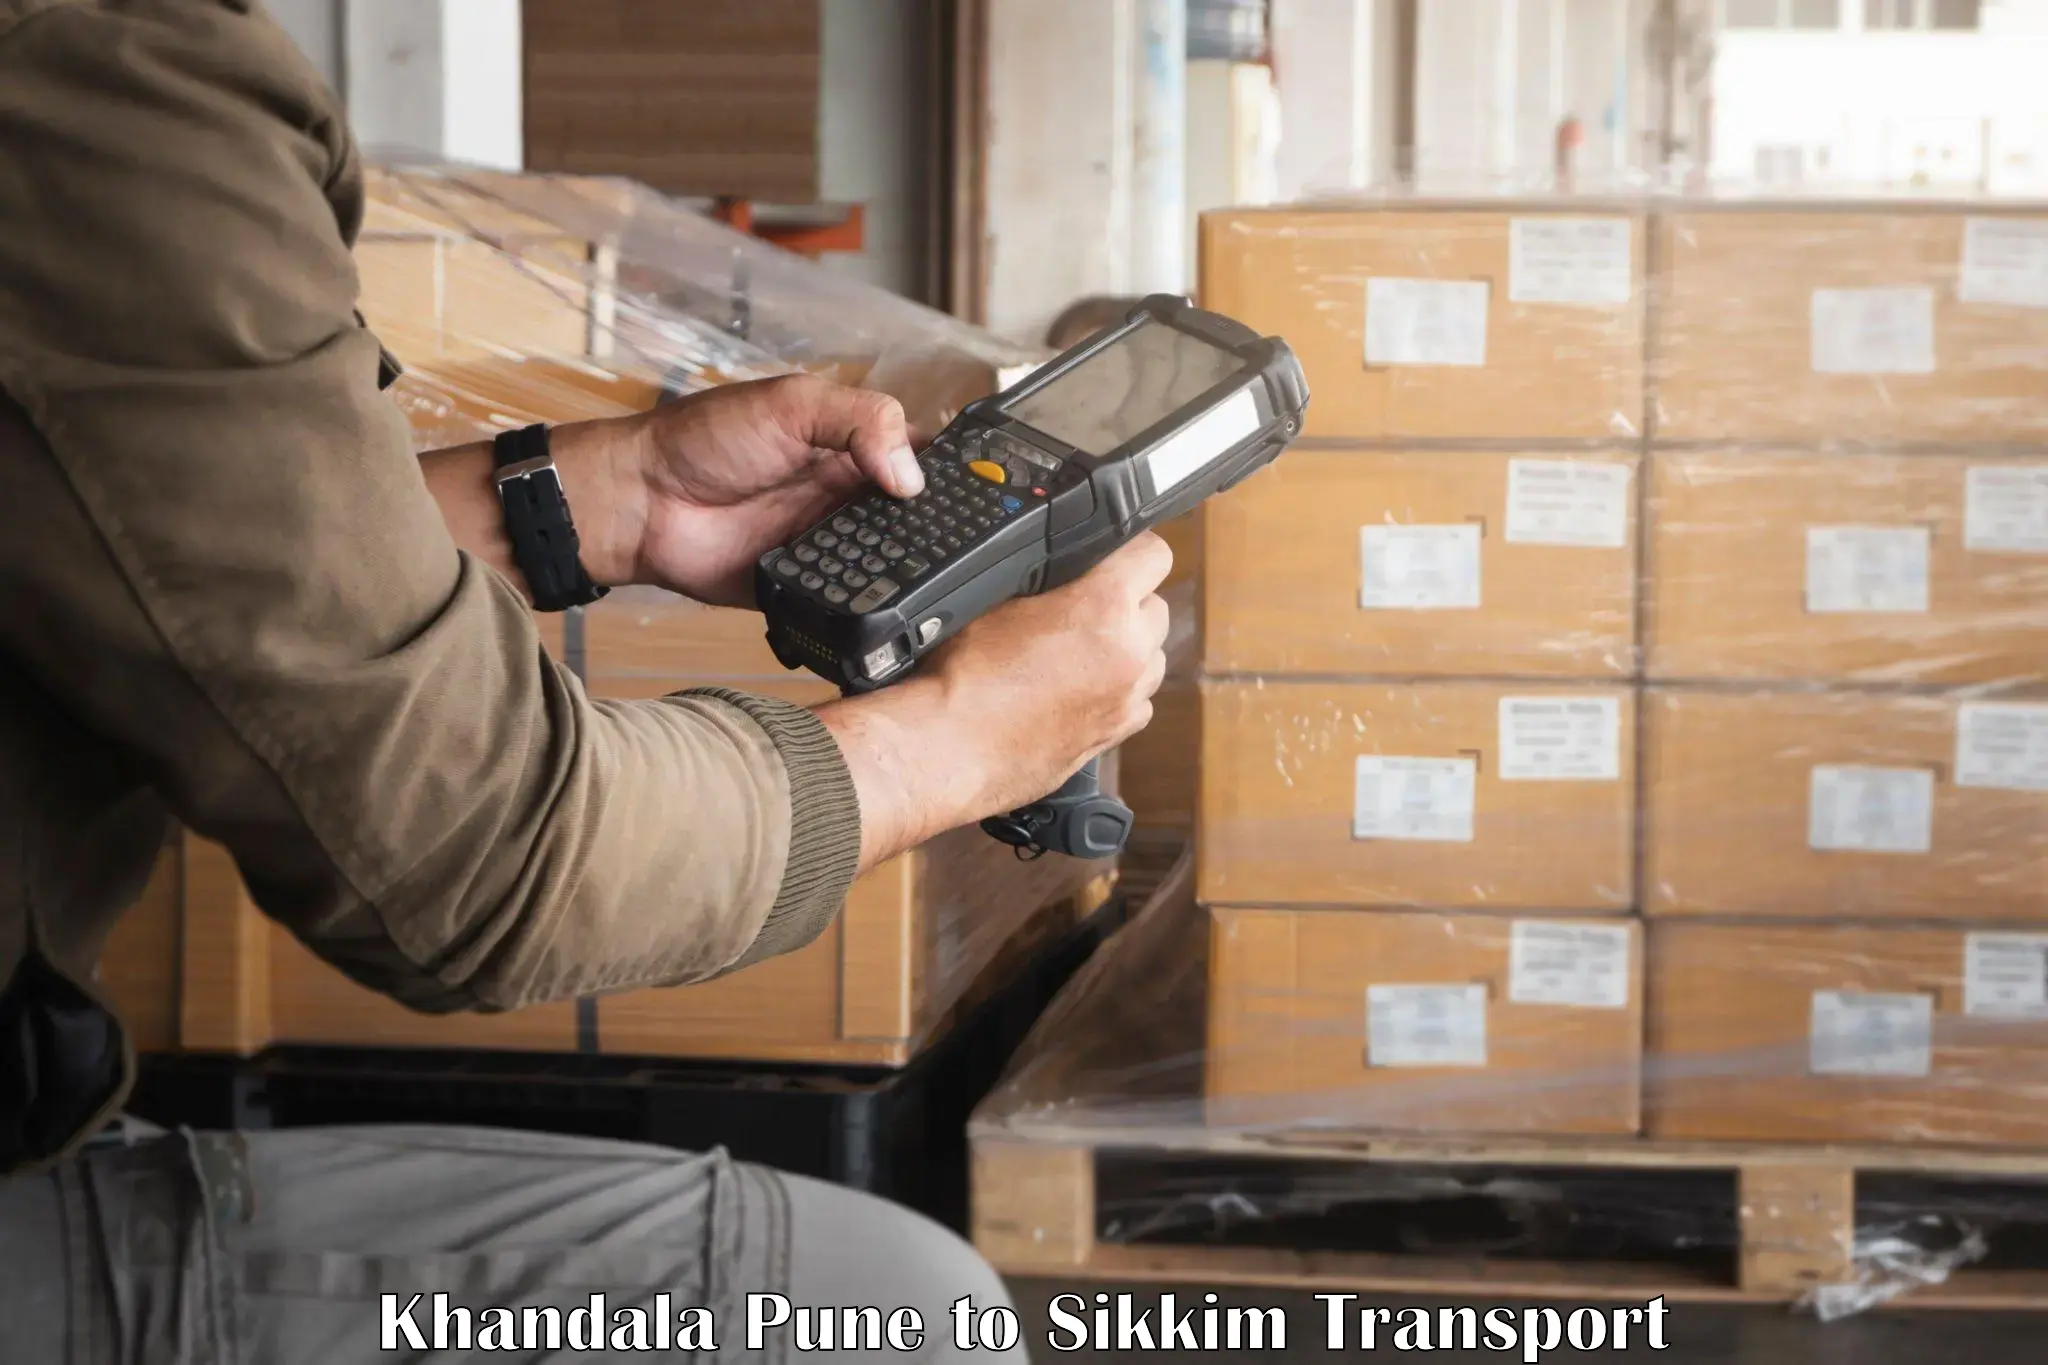 Container transport service Khandala Pune to Sikkim